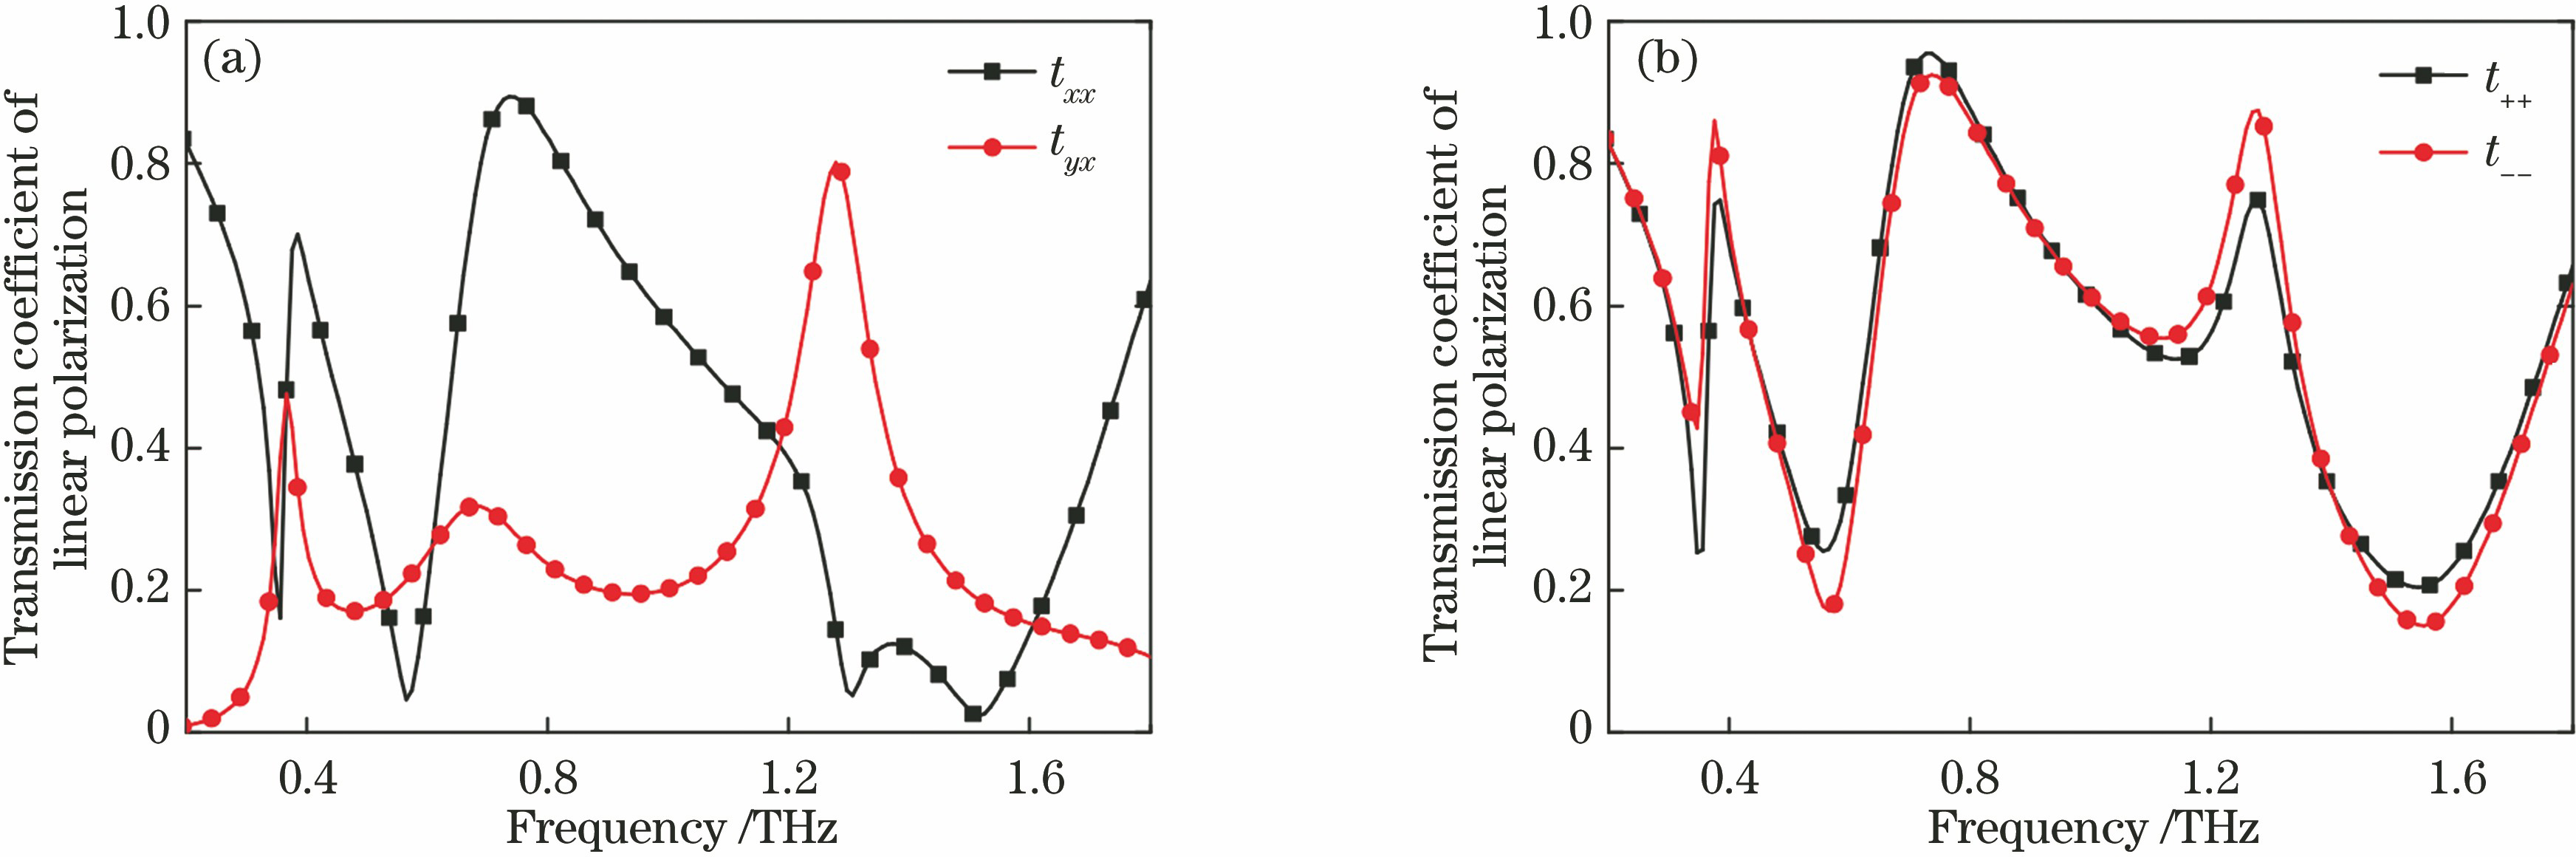 Simulated transmission coefficients of CMS. (a) Transmission coefficient for linear polarization; (b) transmission coefficient for circular polarization